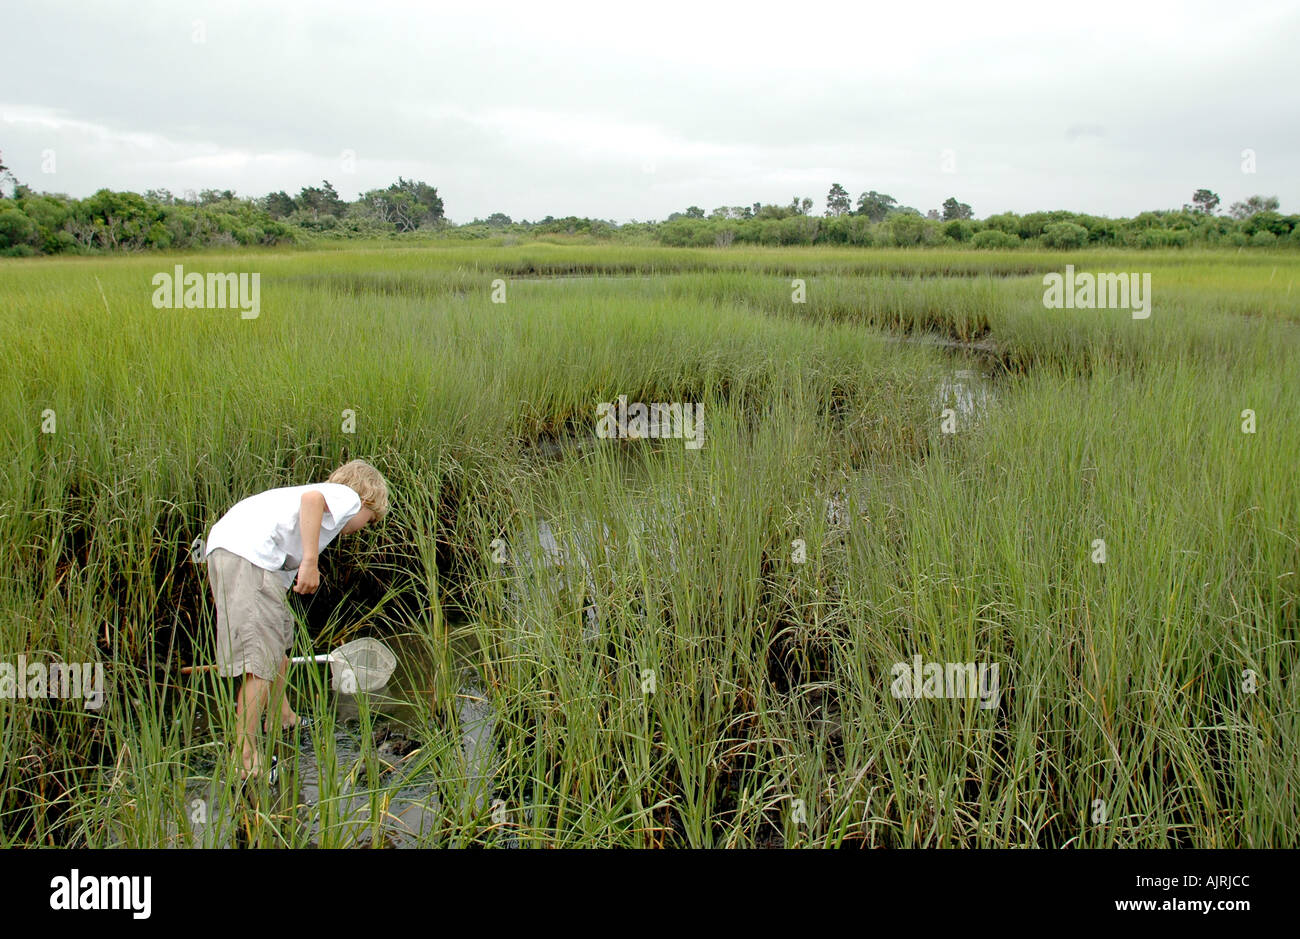 Eight year old boy looking for Blue crabs in the marsh grass, wetlands, of Polpis Harbor, Nantucket Island, Massachusetts ,USA. Stock Photo